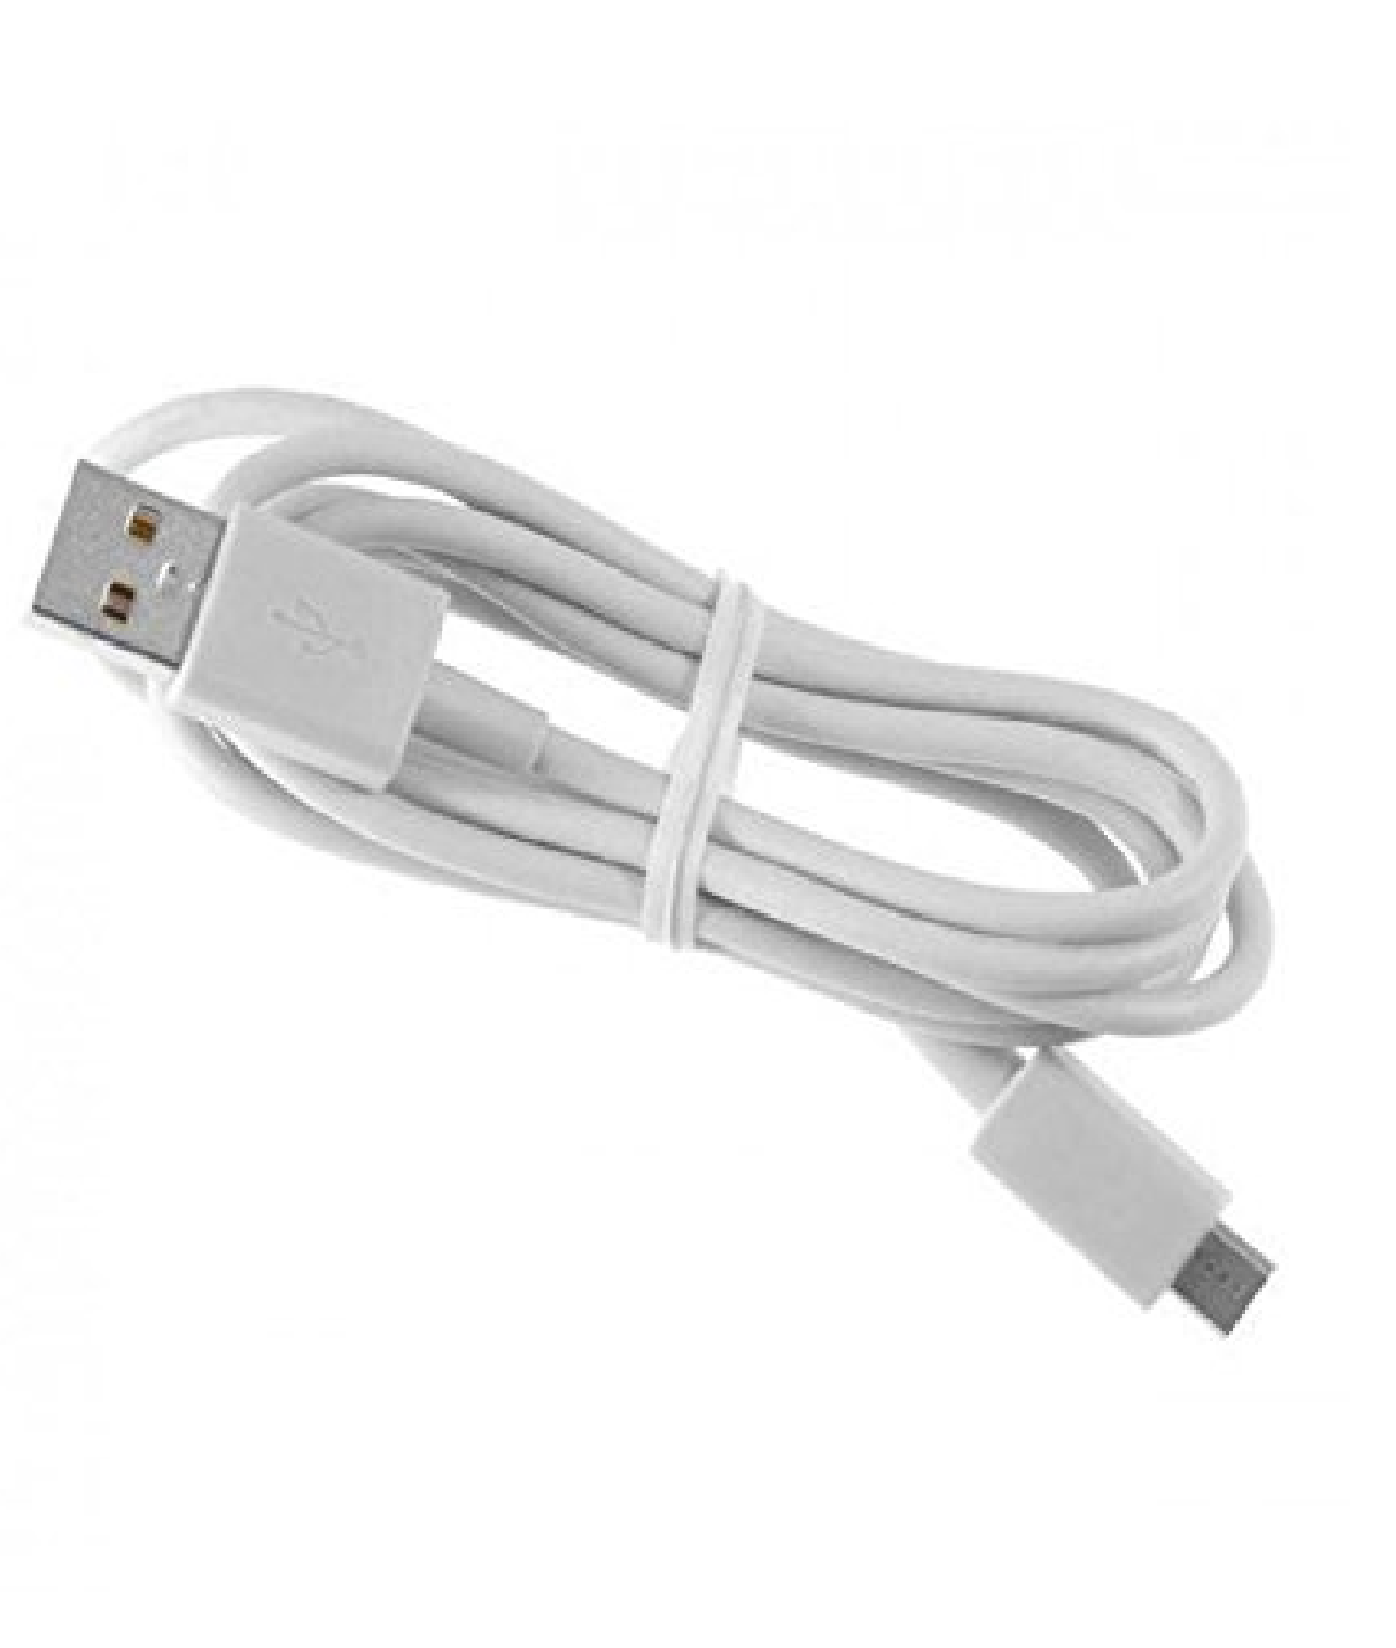 Buy White Micro USB Cable for Raspberry Pi 3 Online at Robu.in